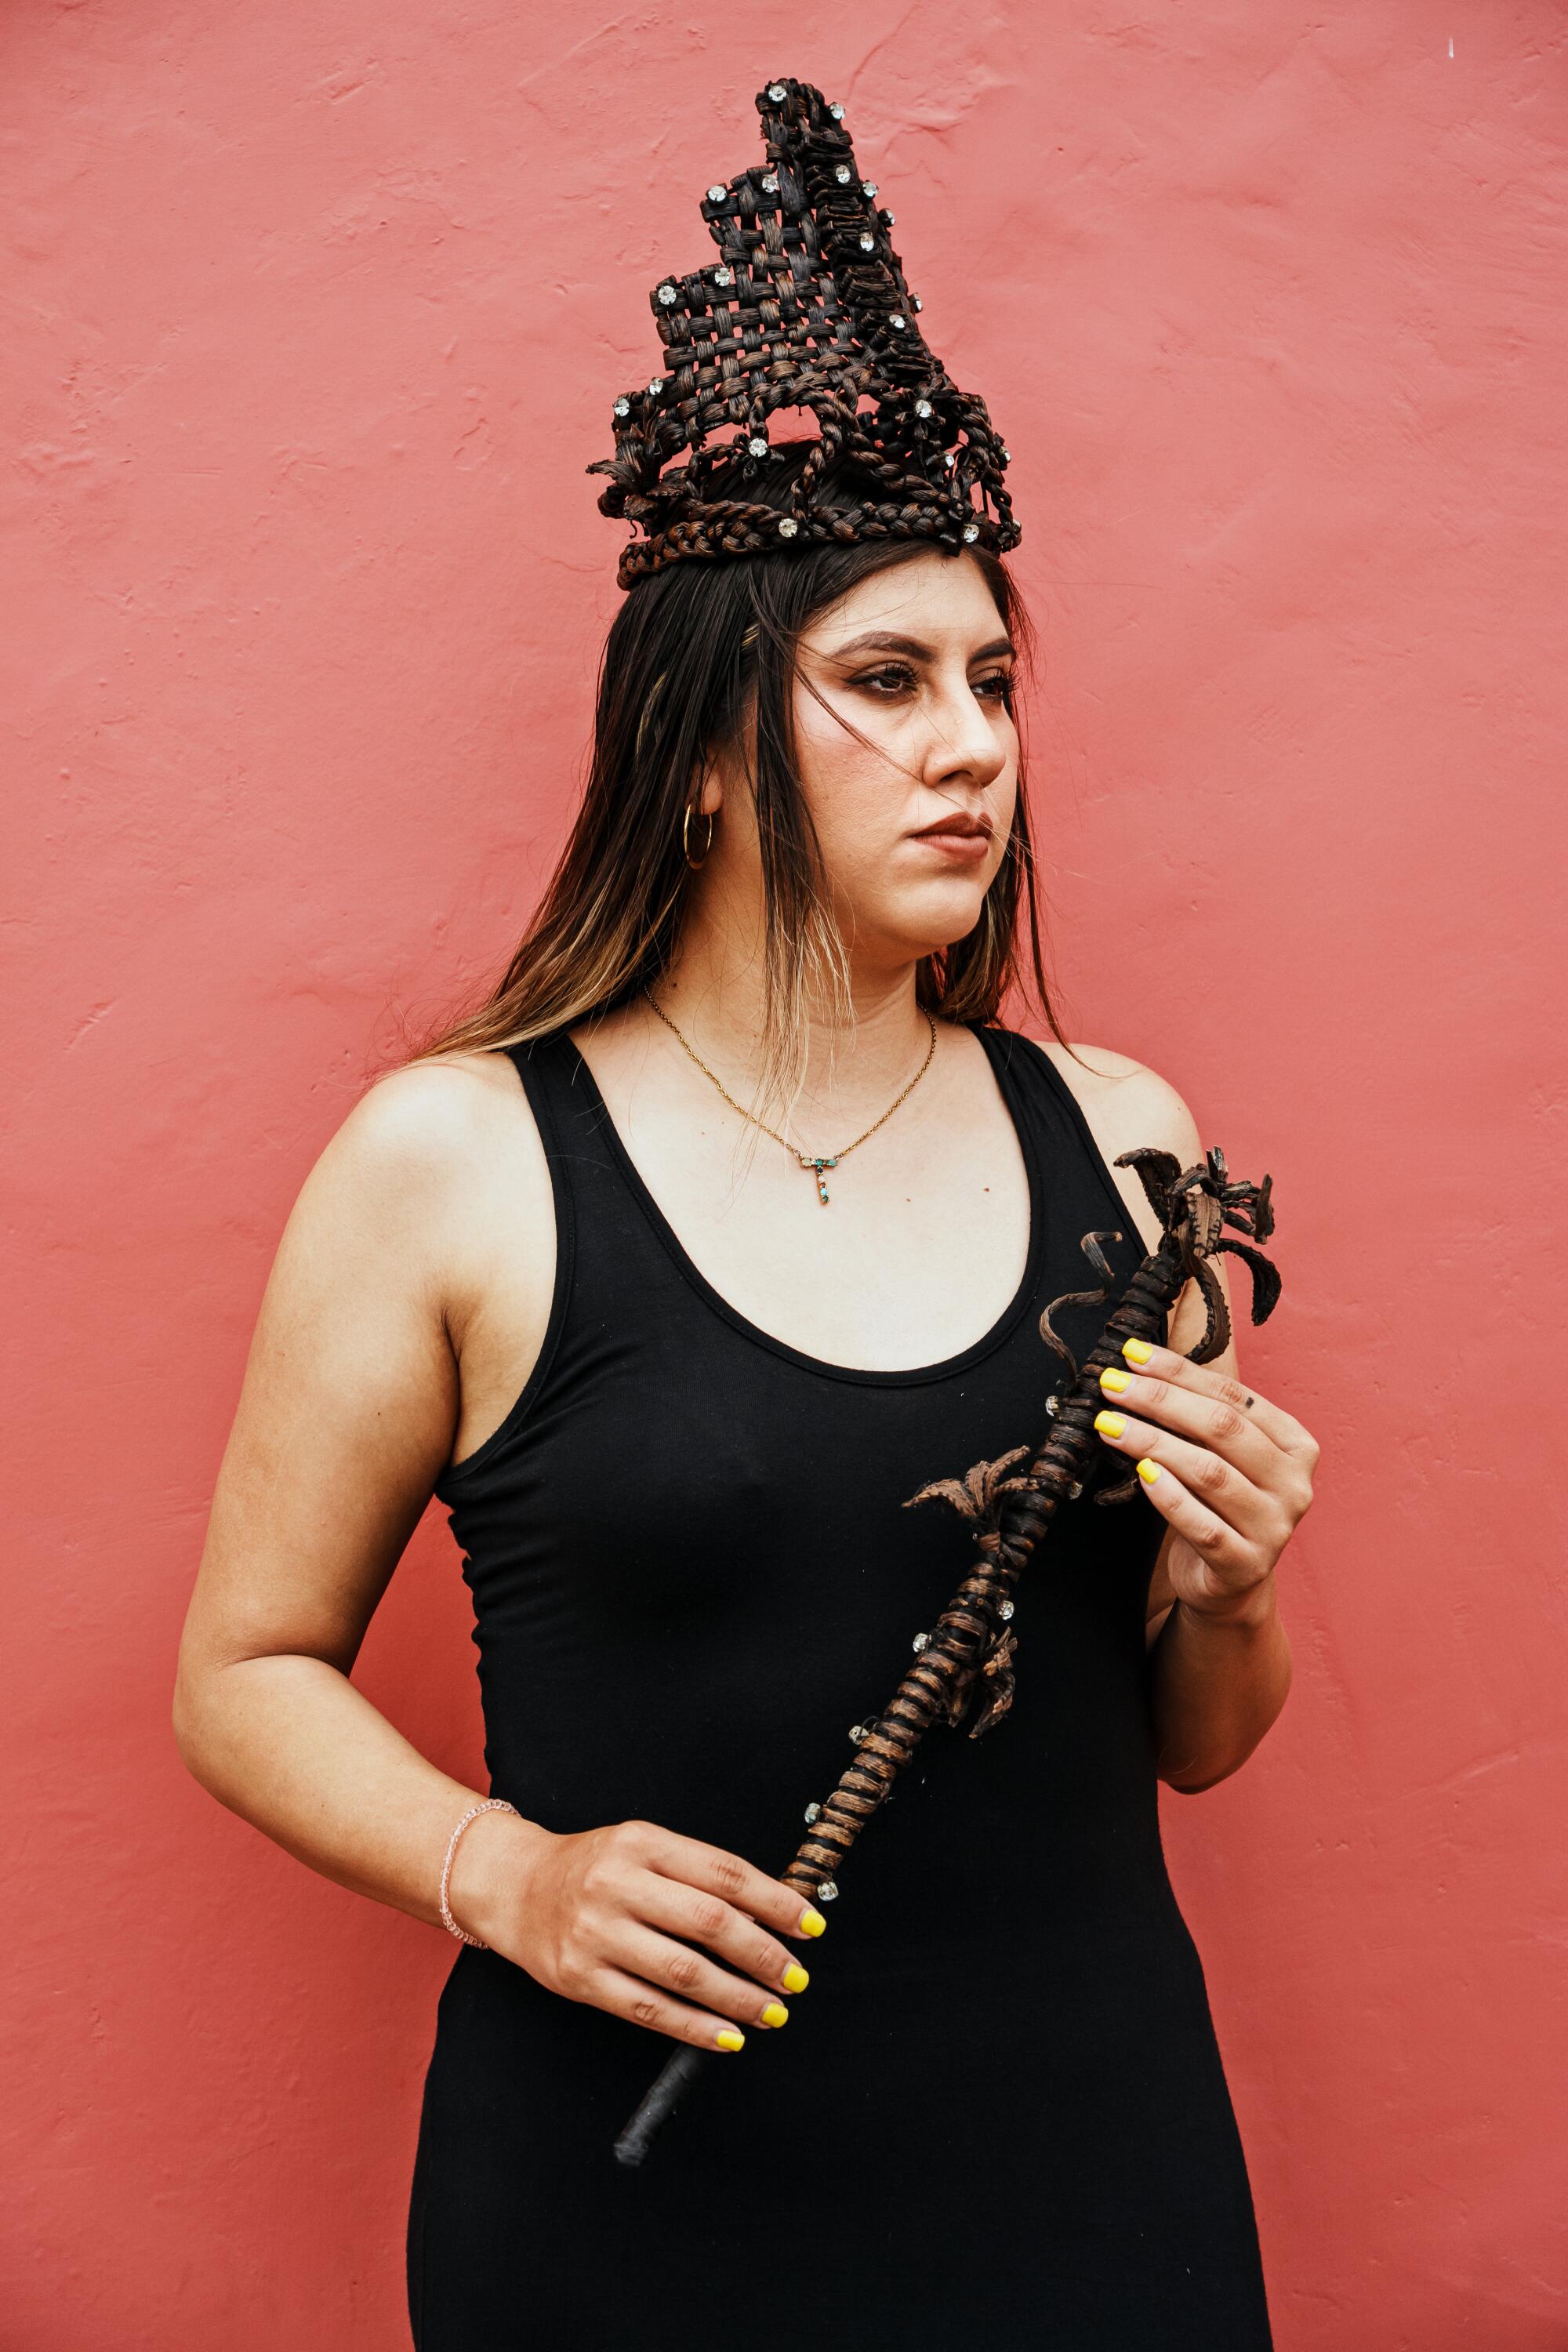 Tania Zayas, 26, poses for a portrait with her vanilla crown and wand.